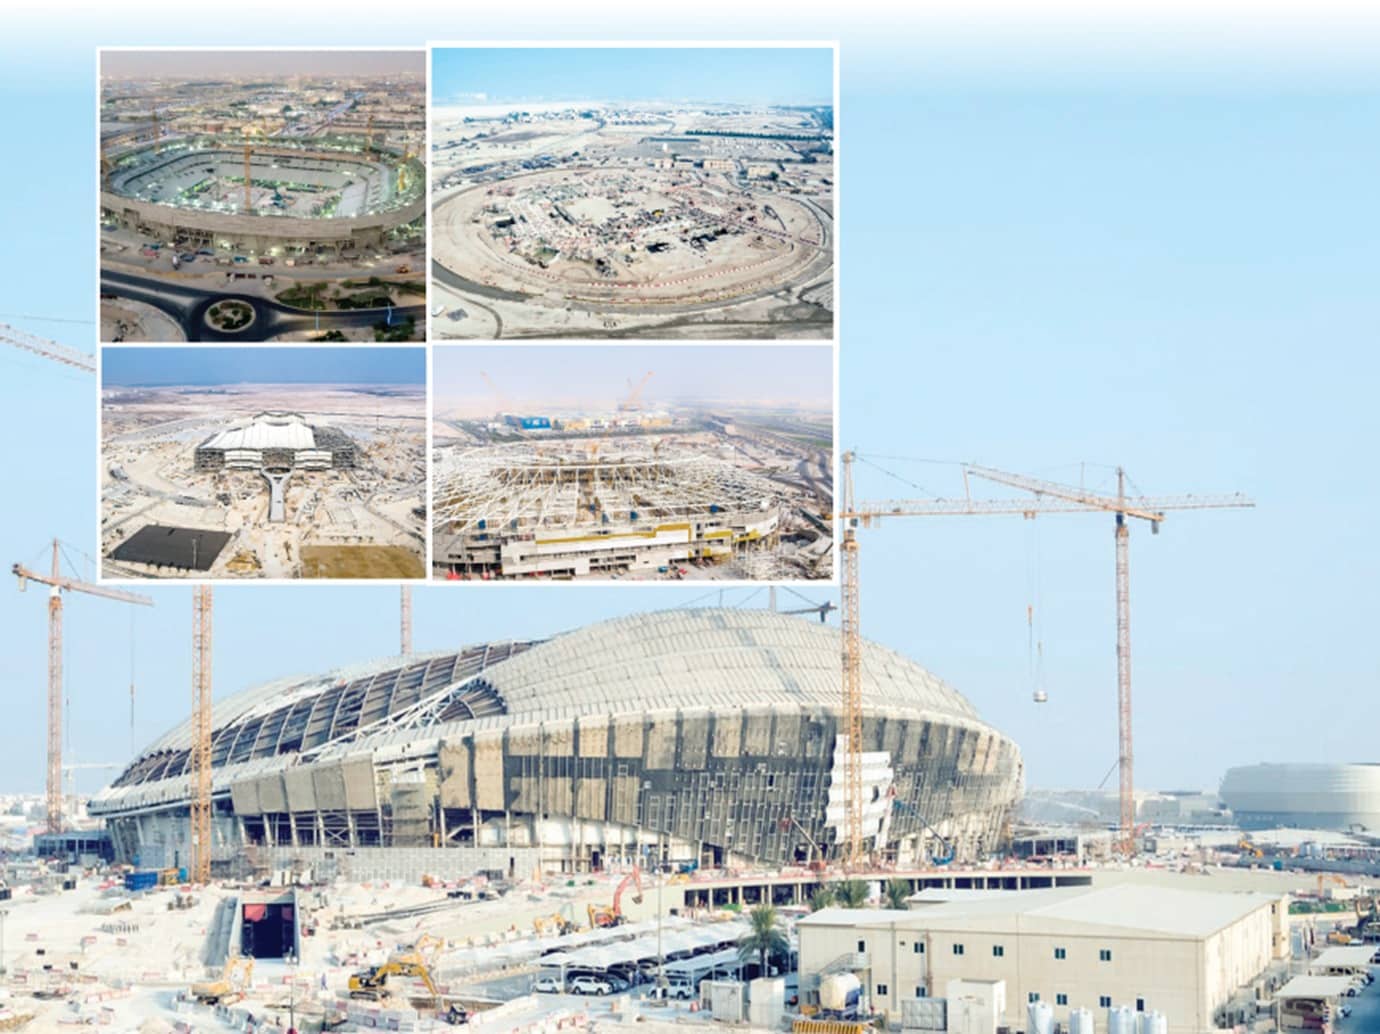 Four years to go for the first kick-off at the 2022 FIFA World Cup in Qatar